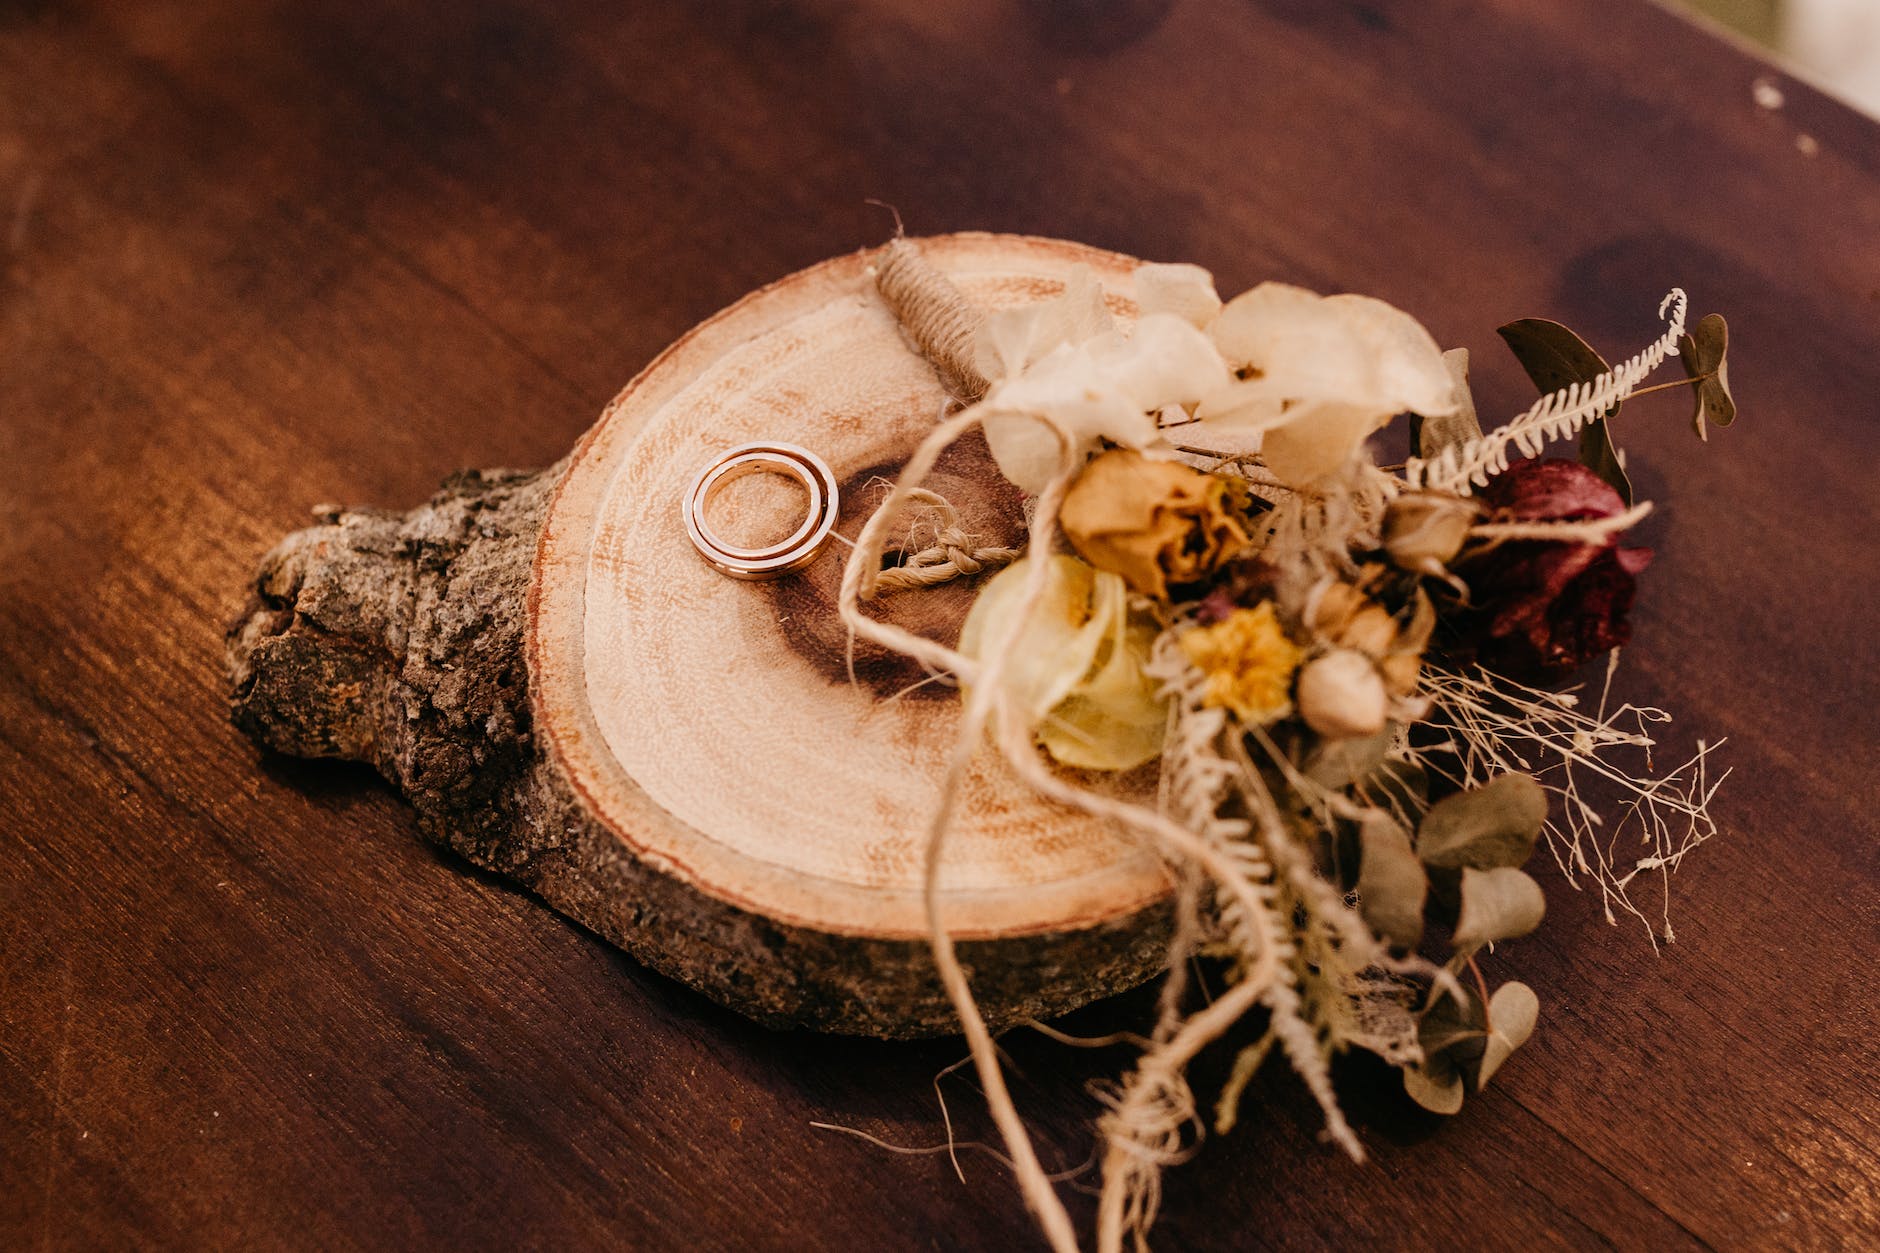 bouquet of dried flowers and wedding rings on wood